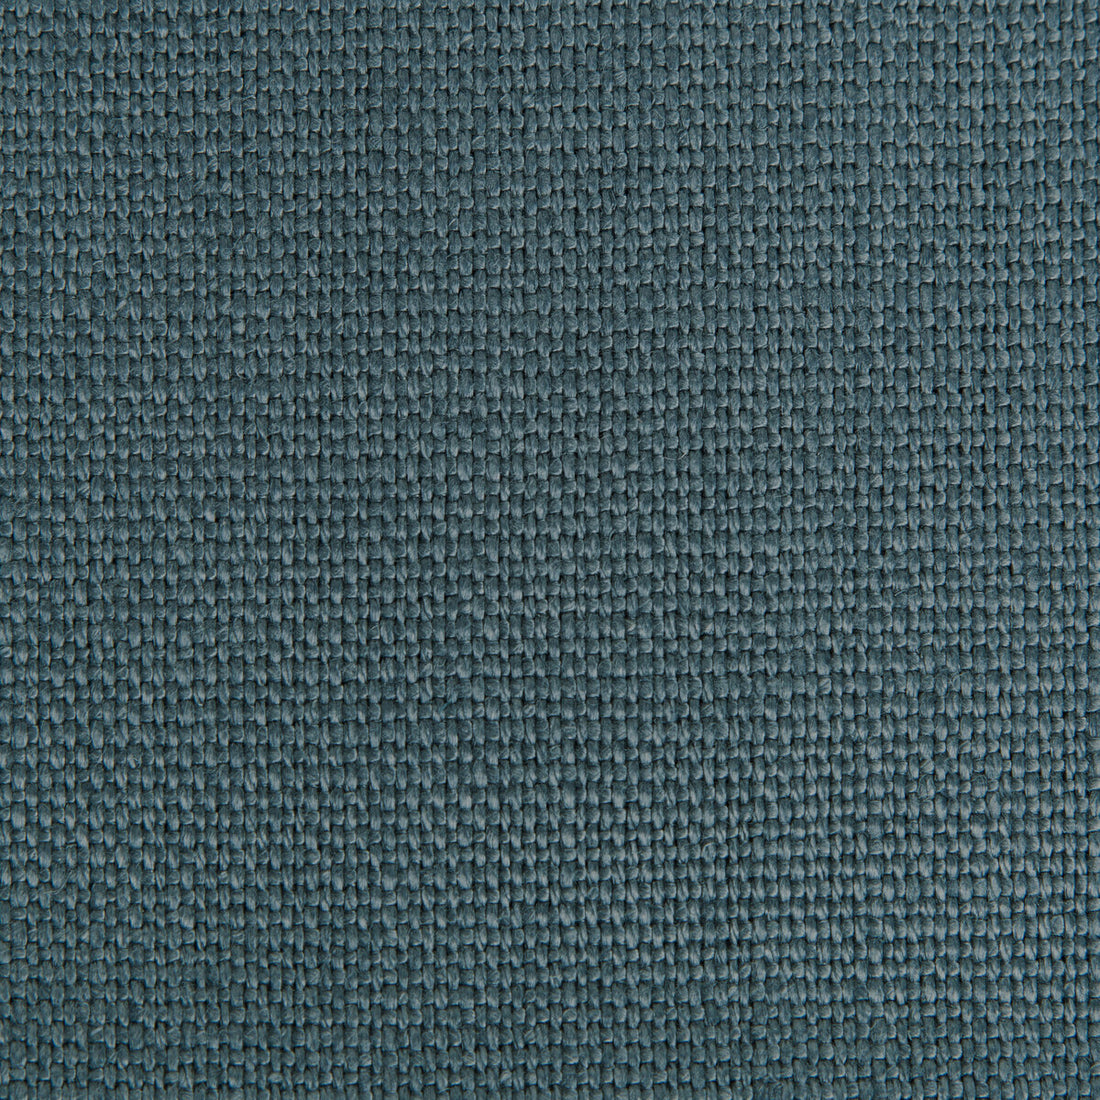 Stone Harbor fabric in ink color - pattern 27591.505.0 - by Kravet Basics